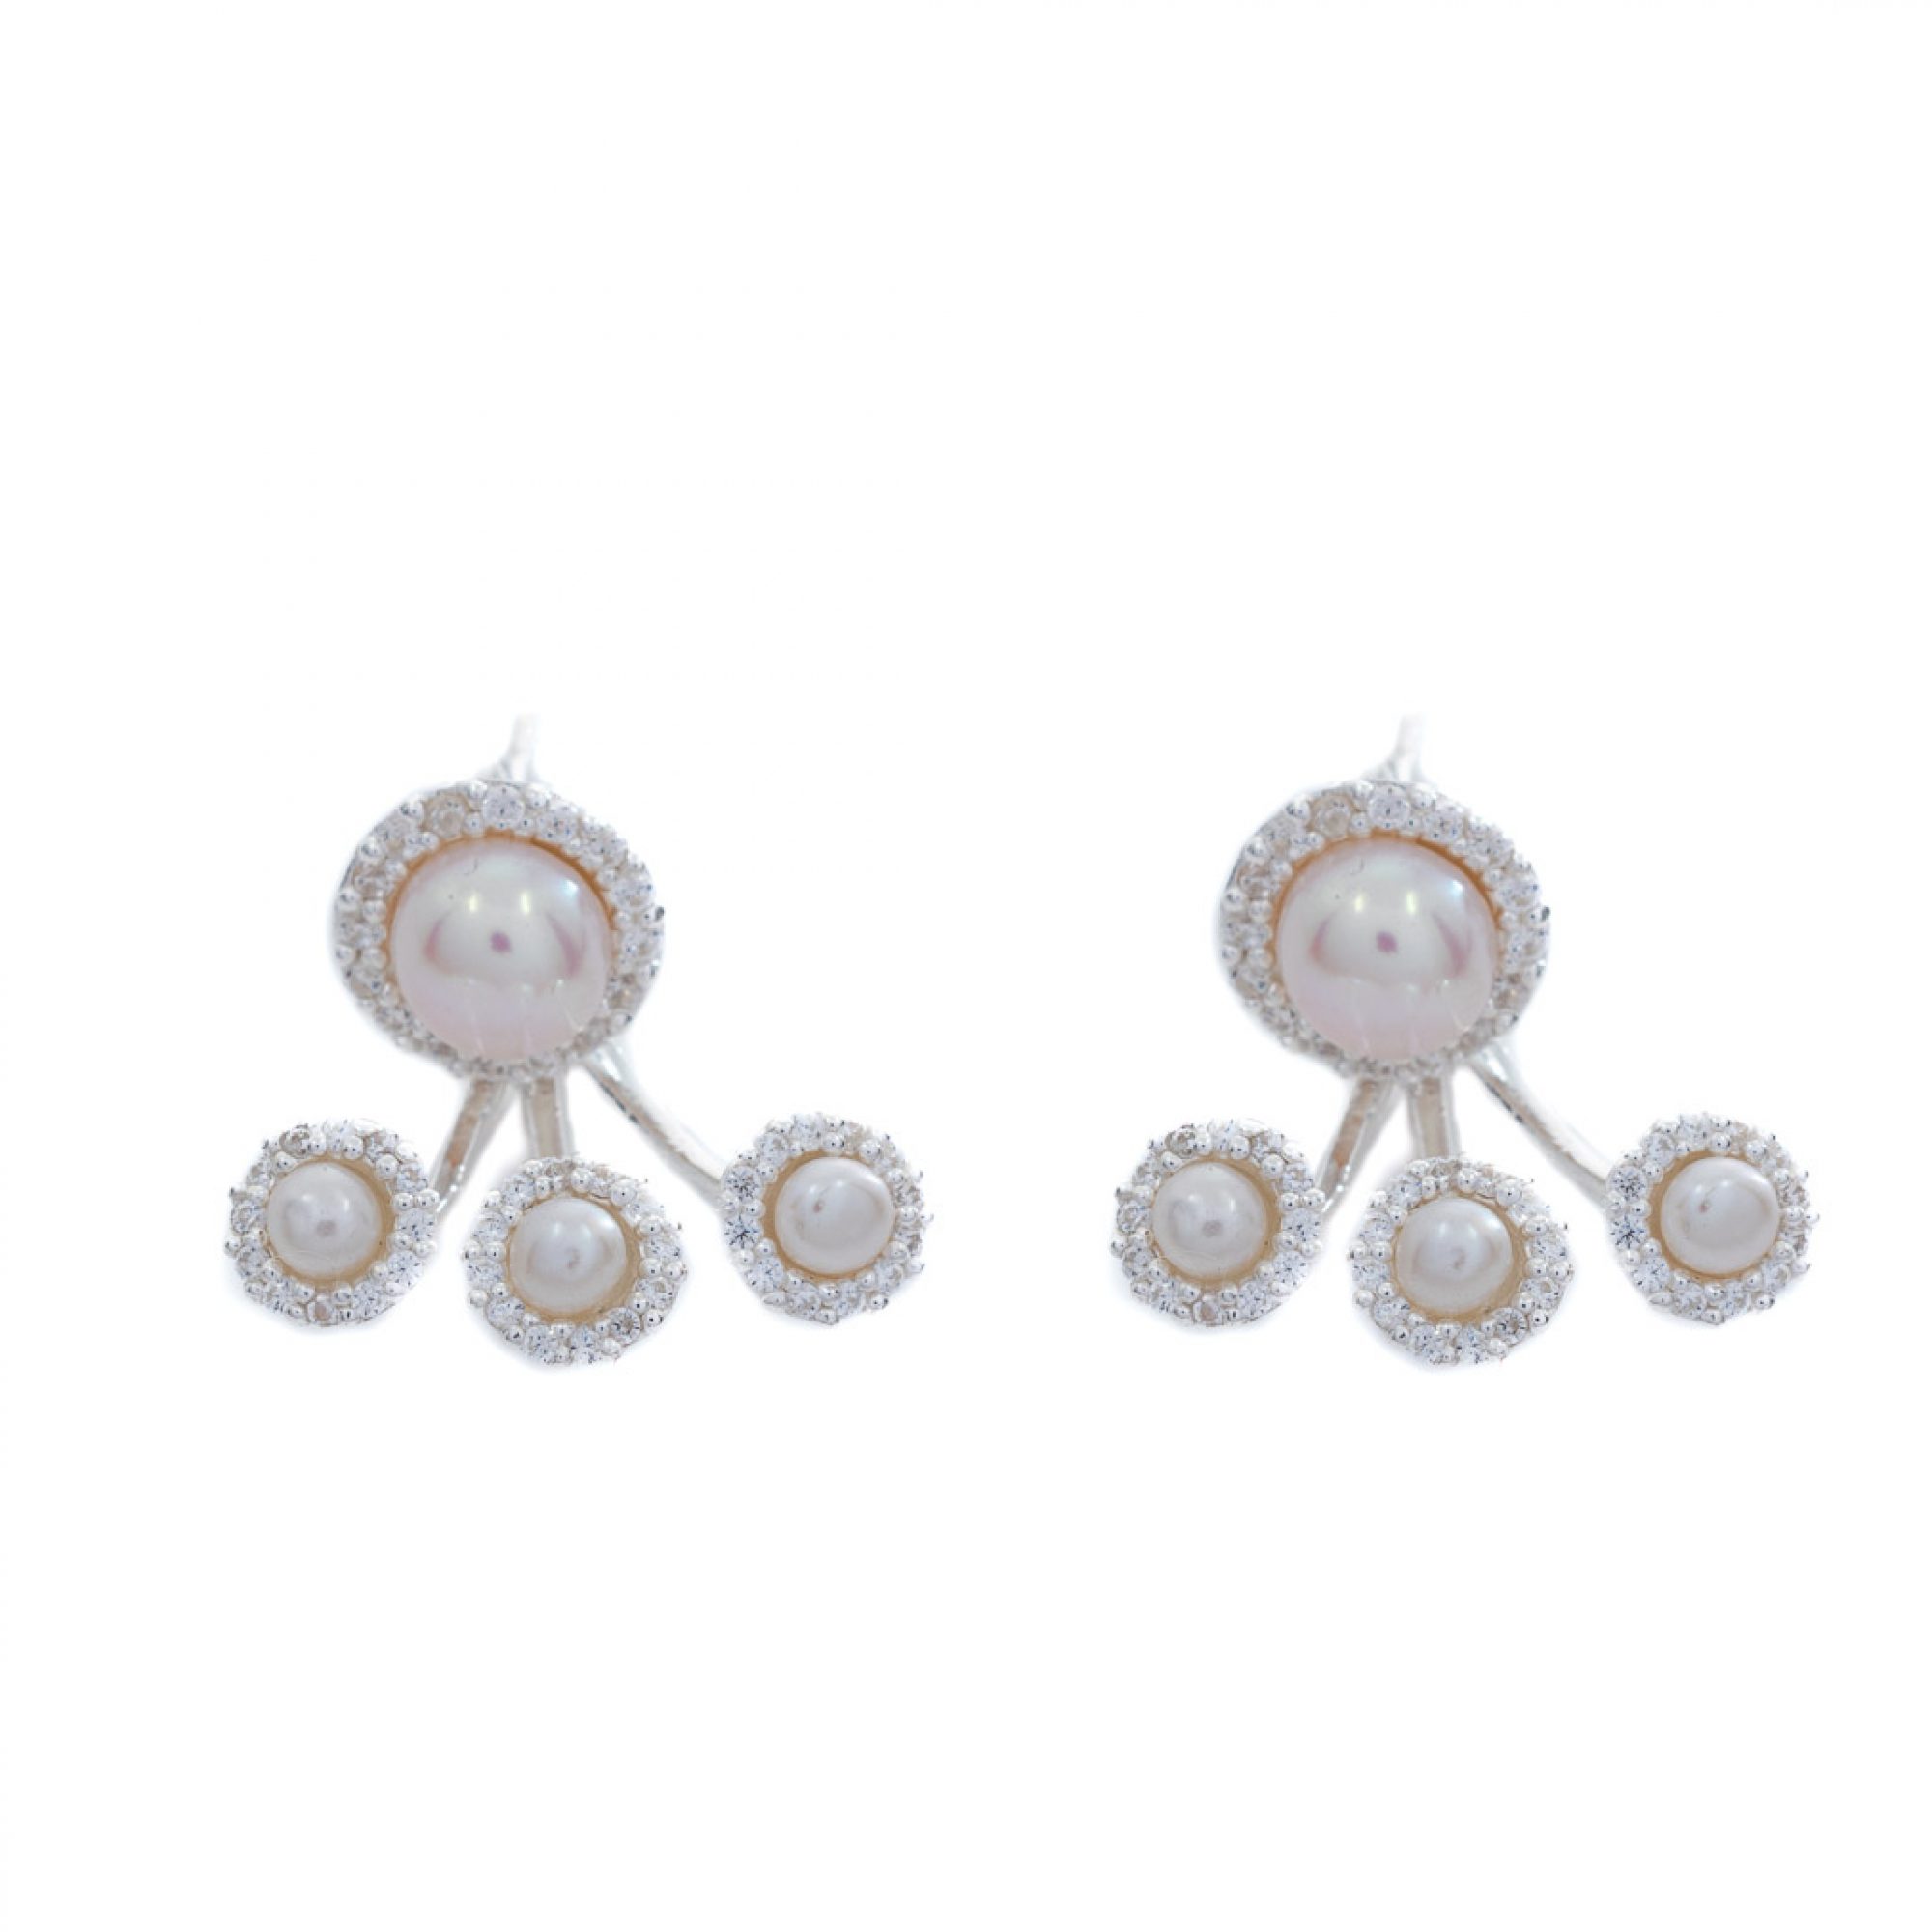 Silver earrings with real pearls and zircon stones